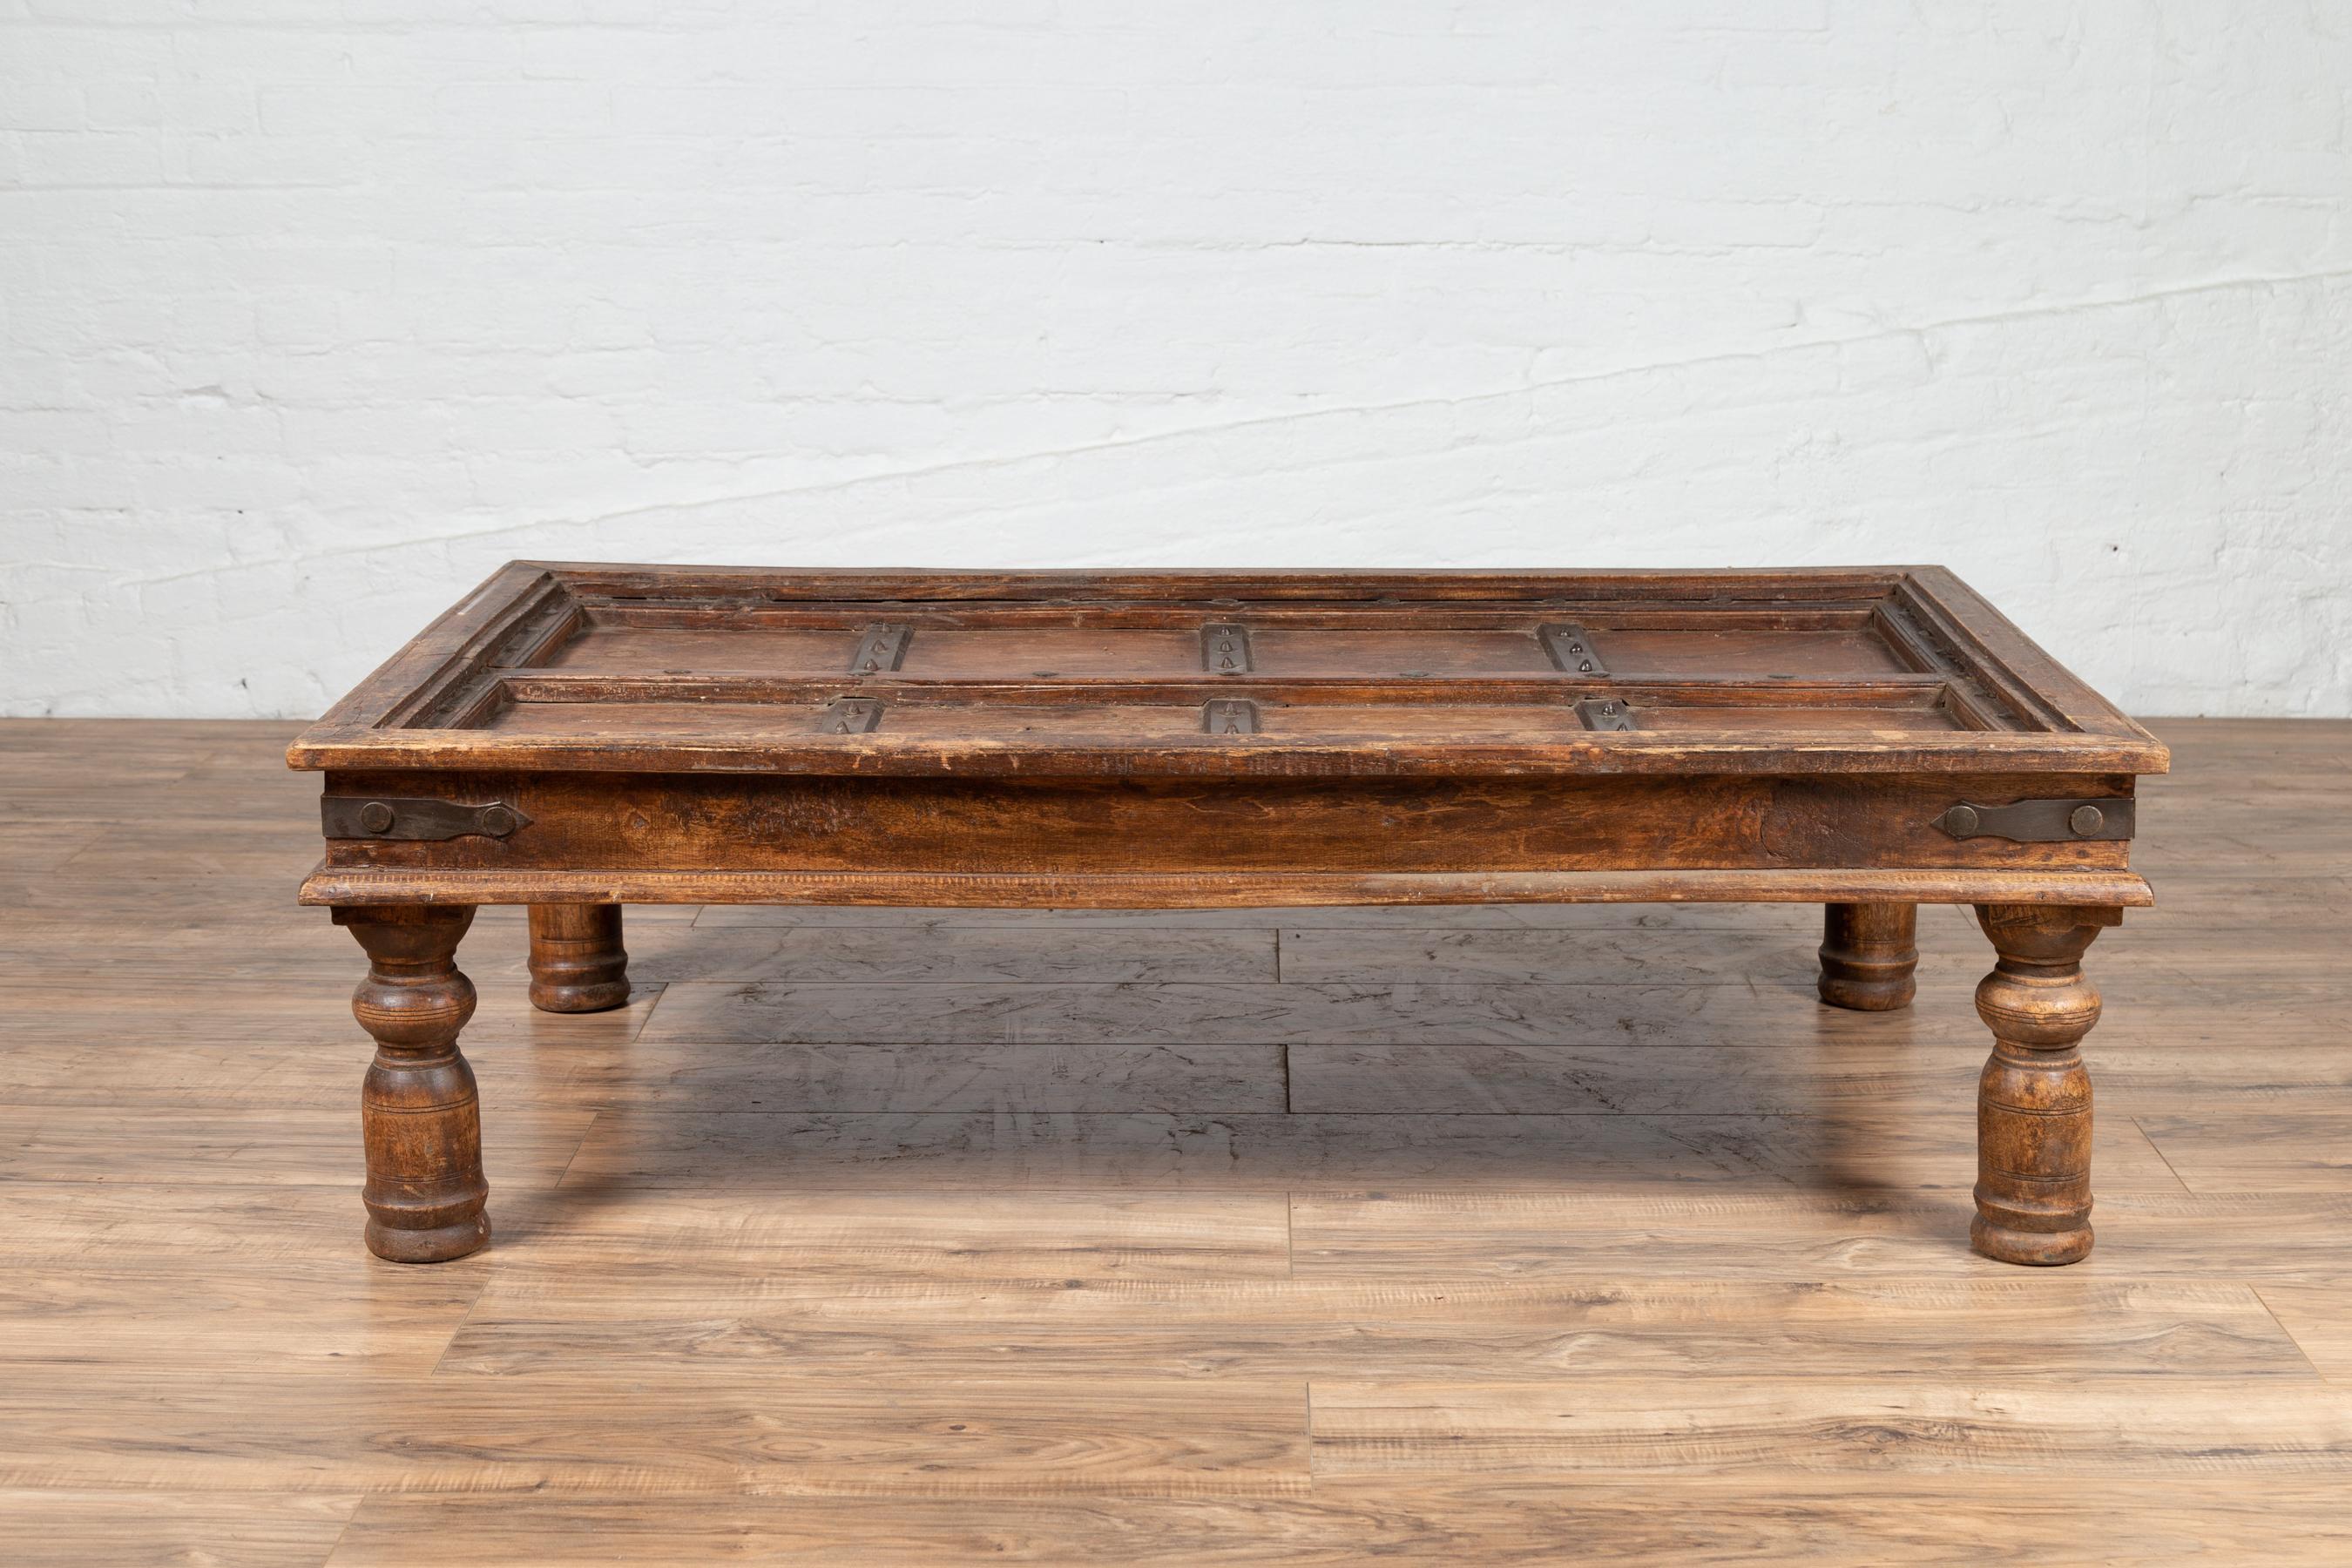 An antique Indian palace wooden door made into a coffee table with iron accents and baluster legs. Born in India during the early years of the 20th century, this exquisite palace door has been made into a coffee table. The top is rhythmically